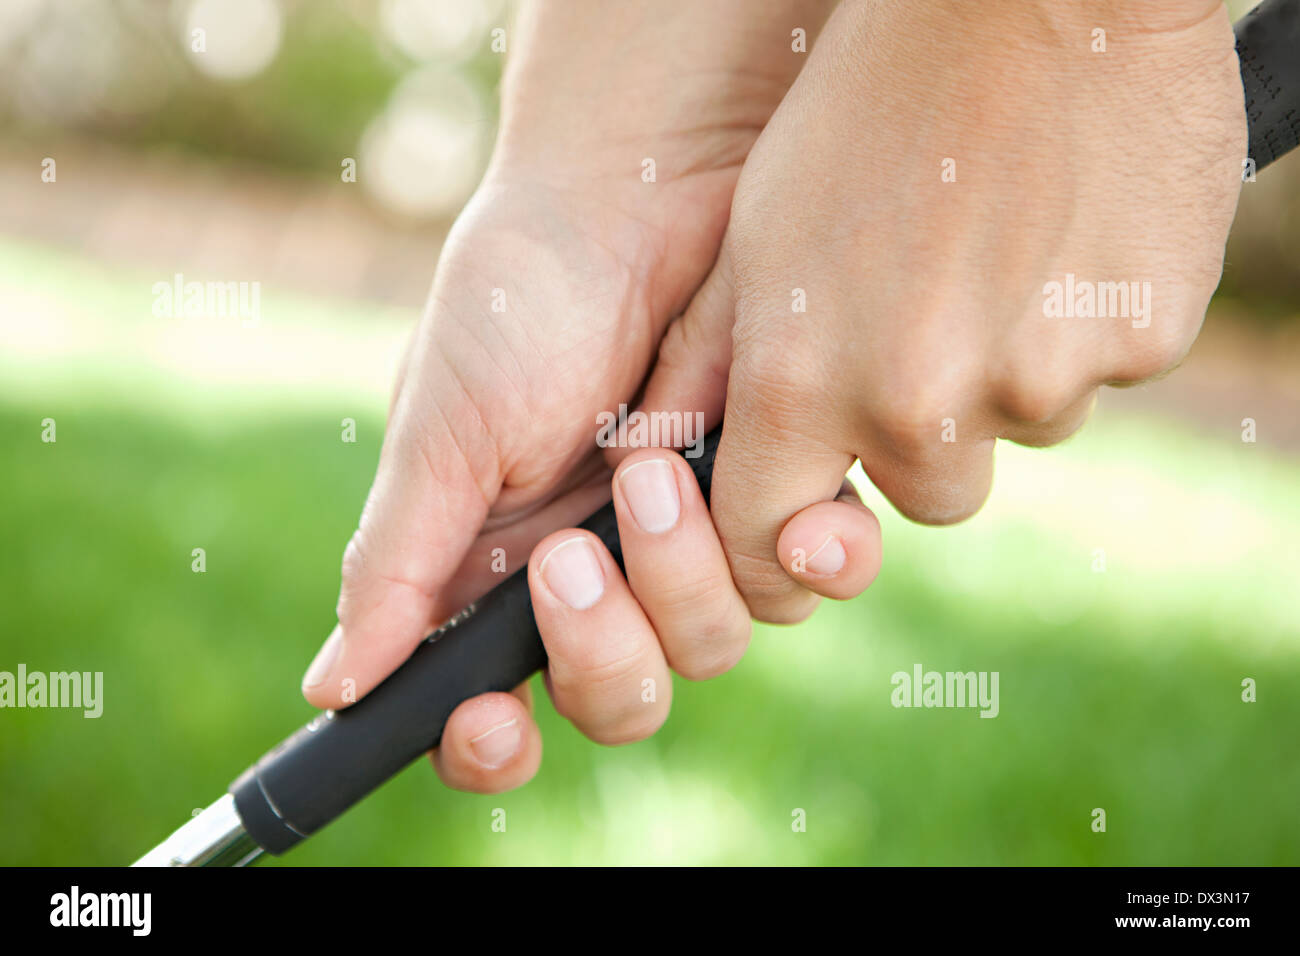 Man's hands holding golf club, close up Stock Photo